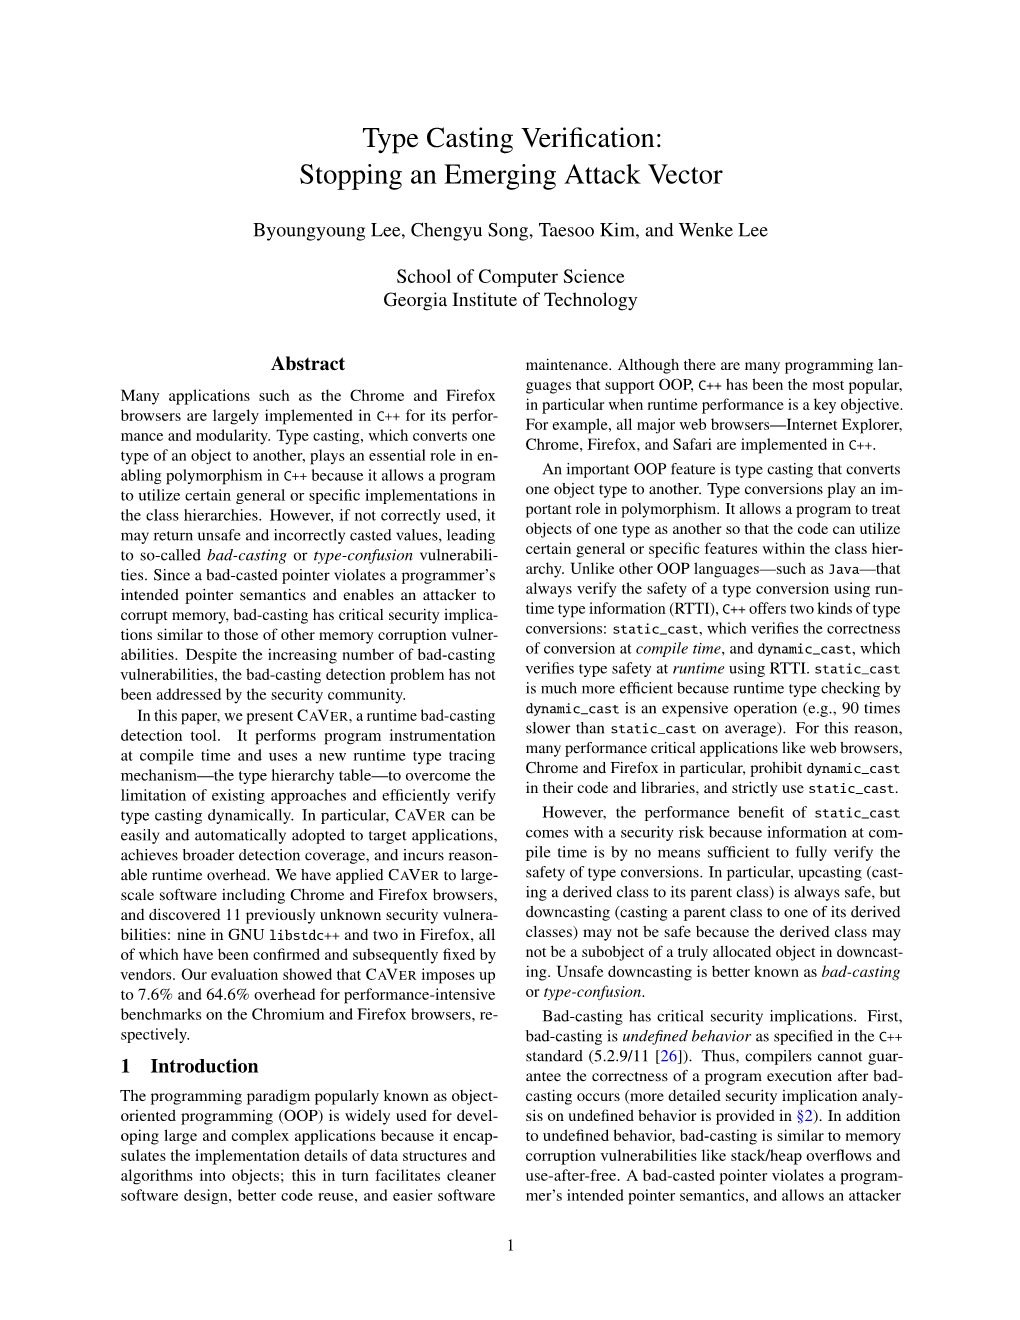 Type Casting Verification: Stopping an Emerging Attack Vector